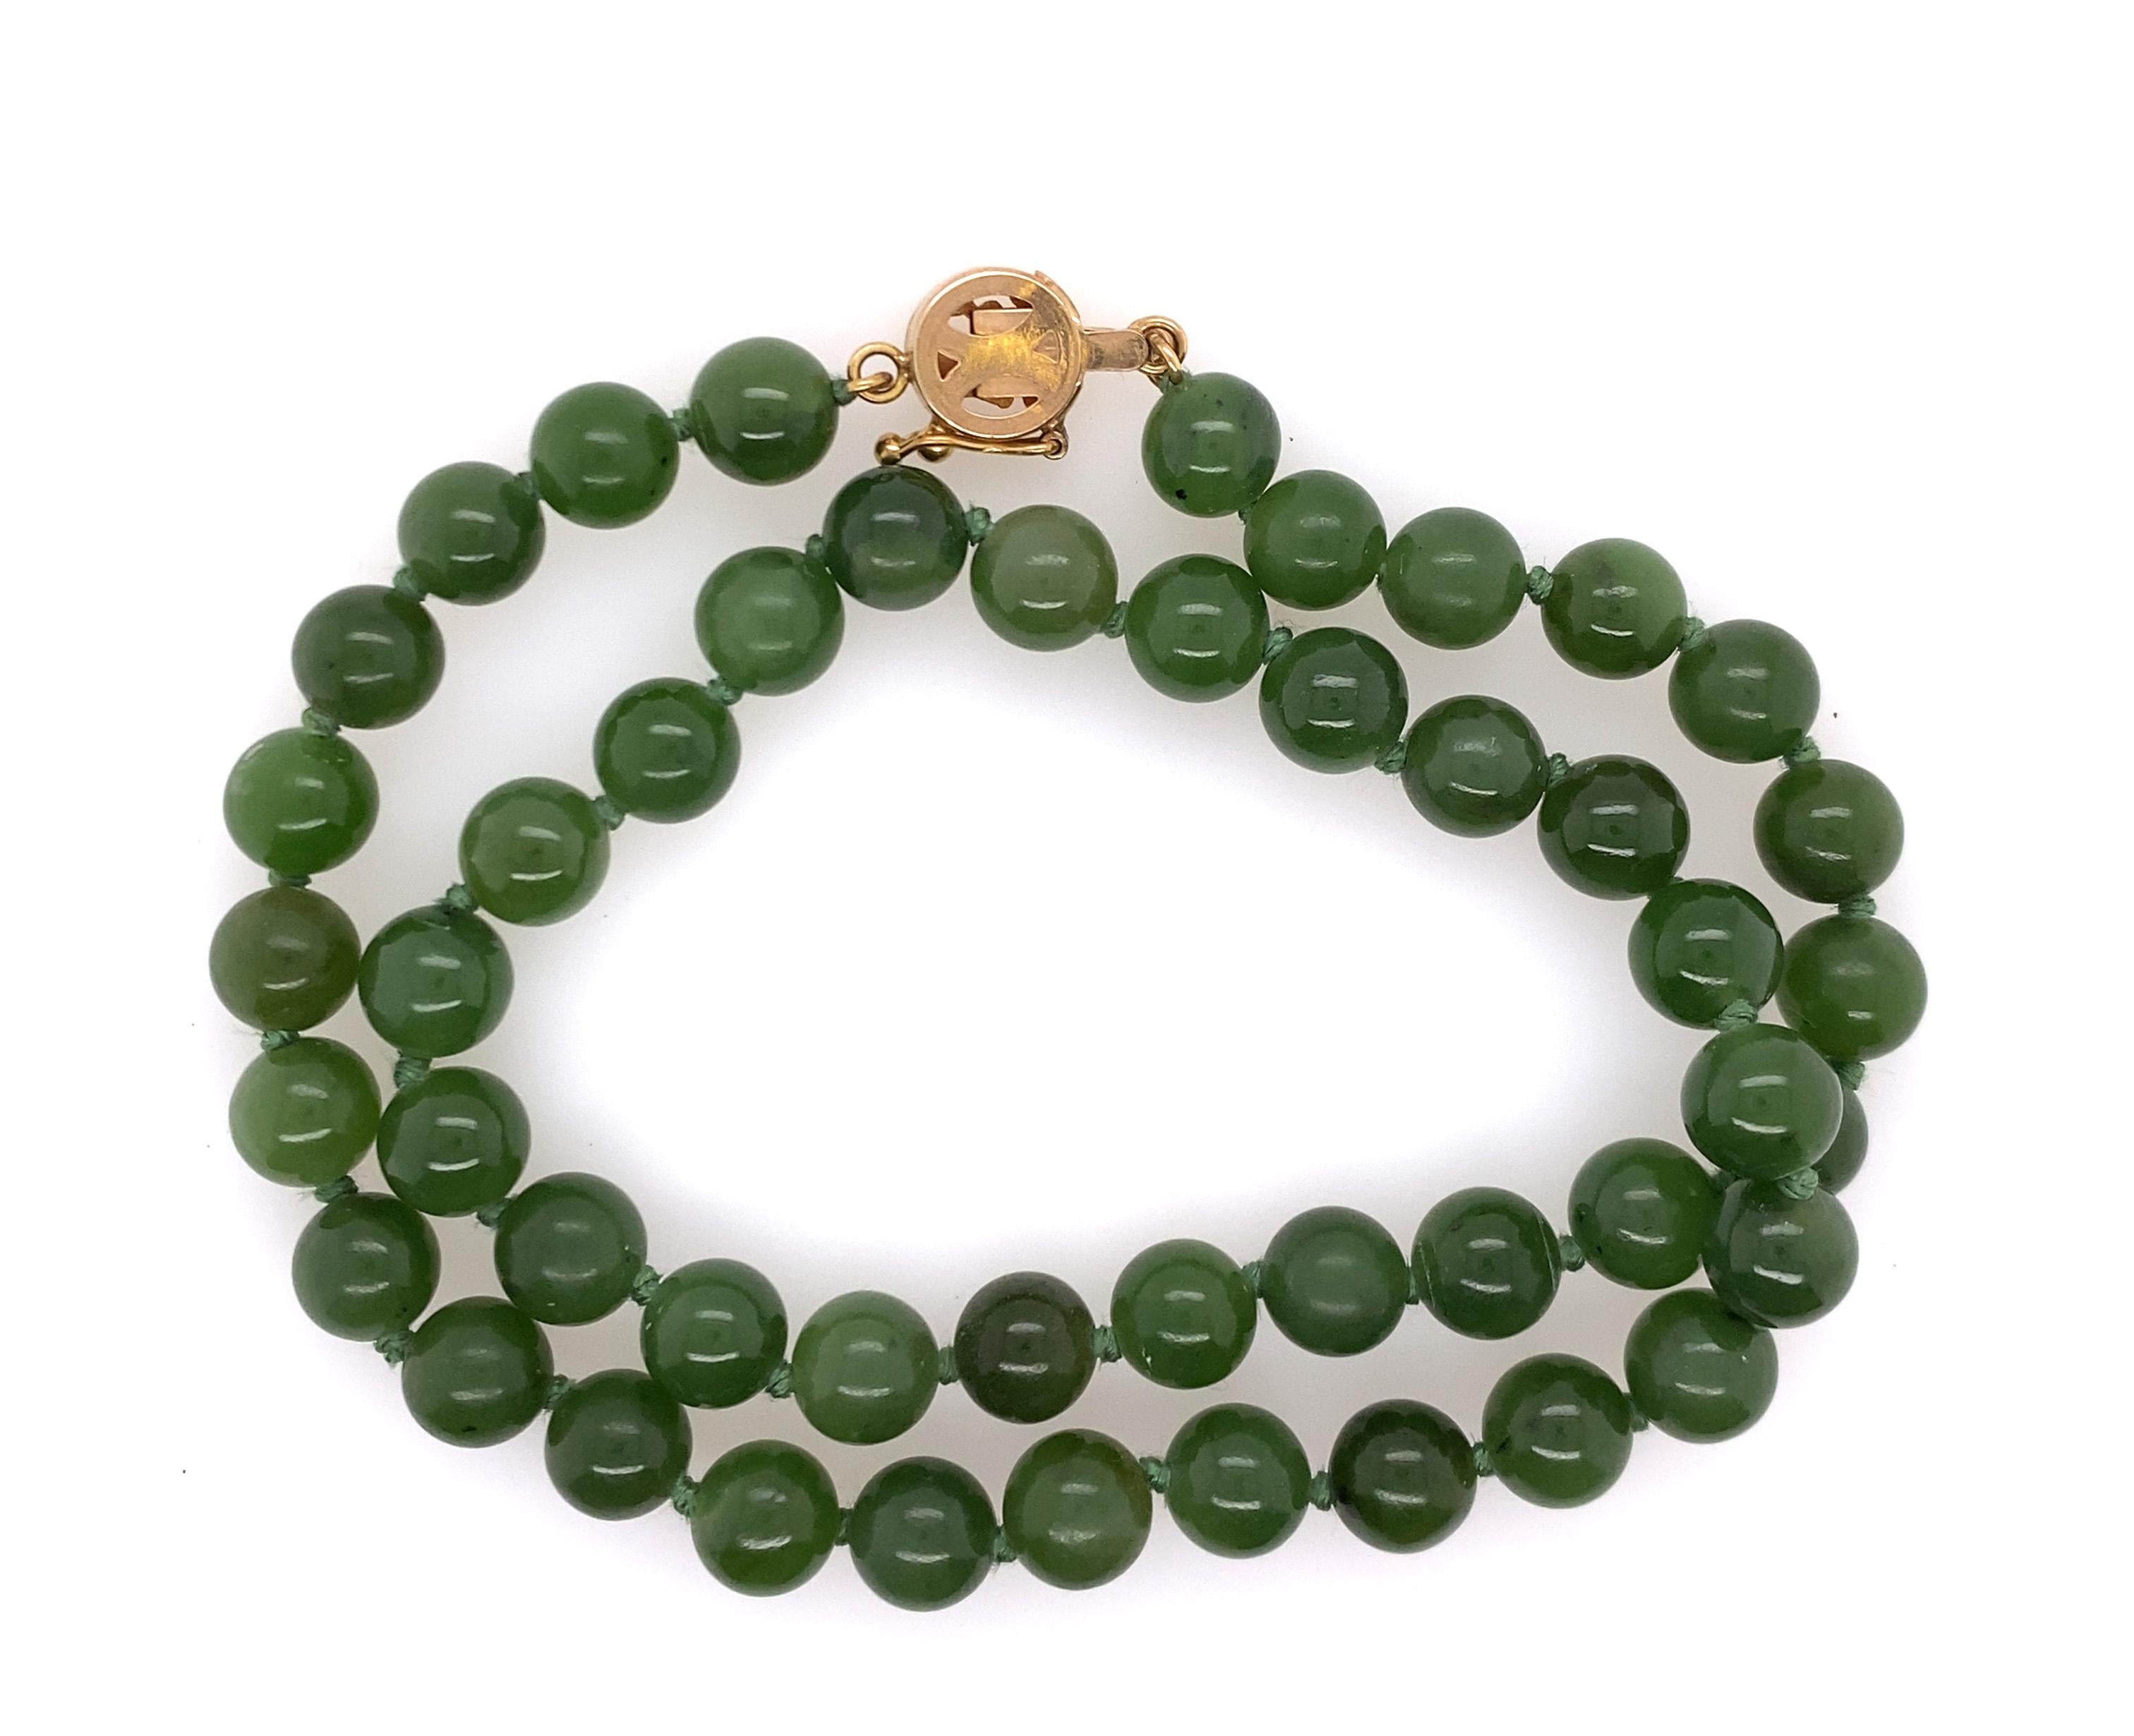 Vintage Retro Jade Necklace/Strand 14K Yellow Gold 16.5 Inch



Solid 14K Yellow Gold Clasp

100% Natural Jade Gemstone

Get Noticed With This Understated Elegance 

Absolute Perfection

An Honored and Timeless Addition to Any Jewelry Collection